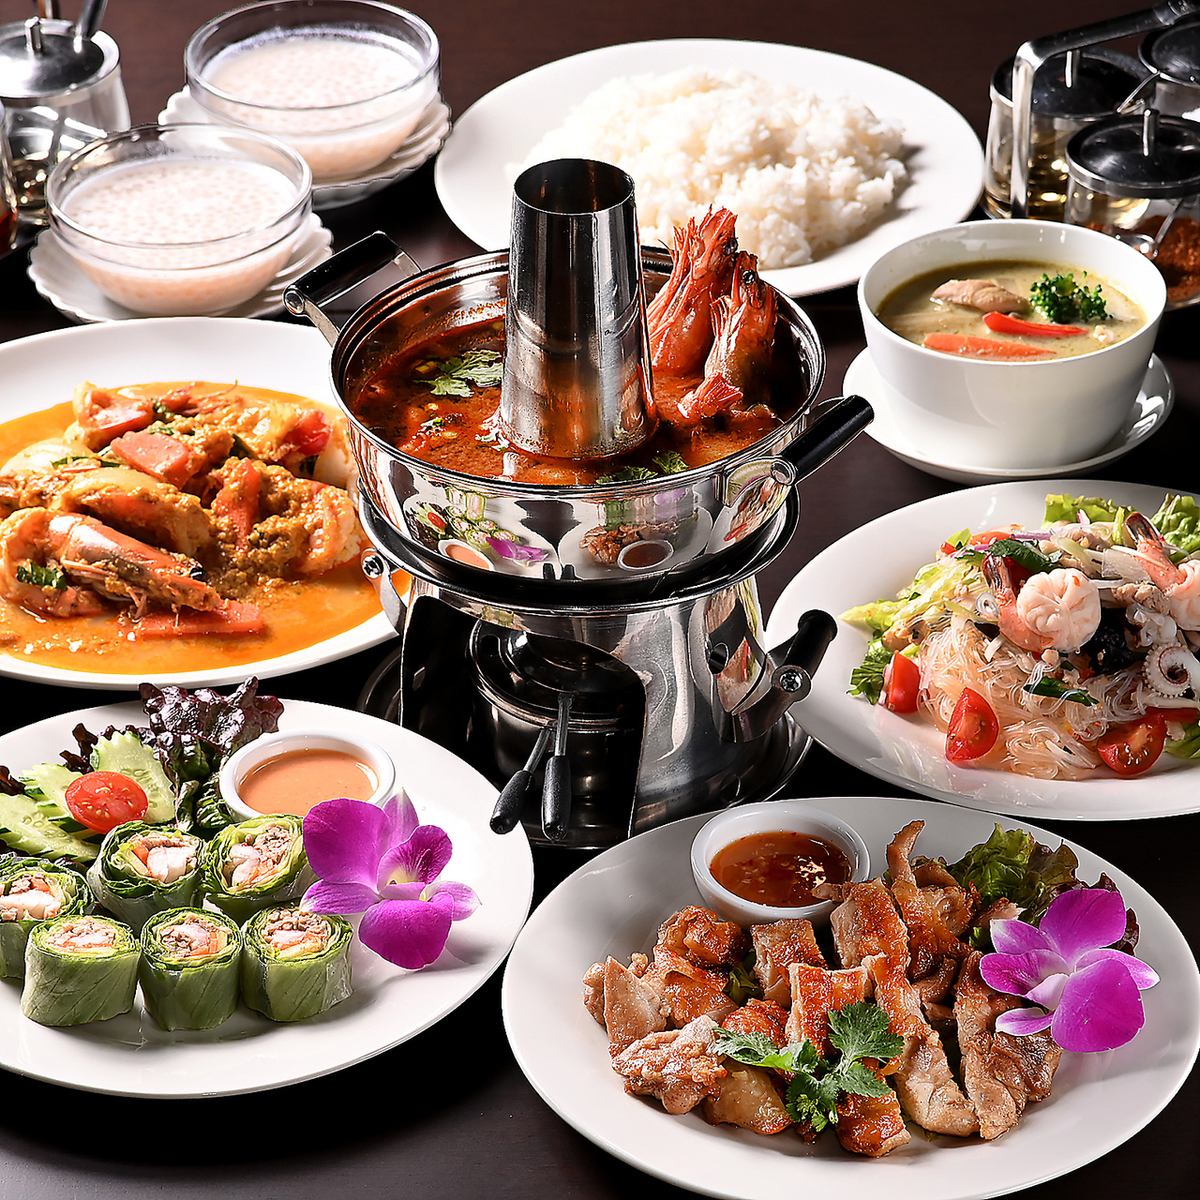 An authentic Thai restaurant where you can enjoy everything from Thai classic menus to local gourmet food ◎